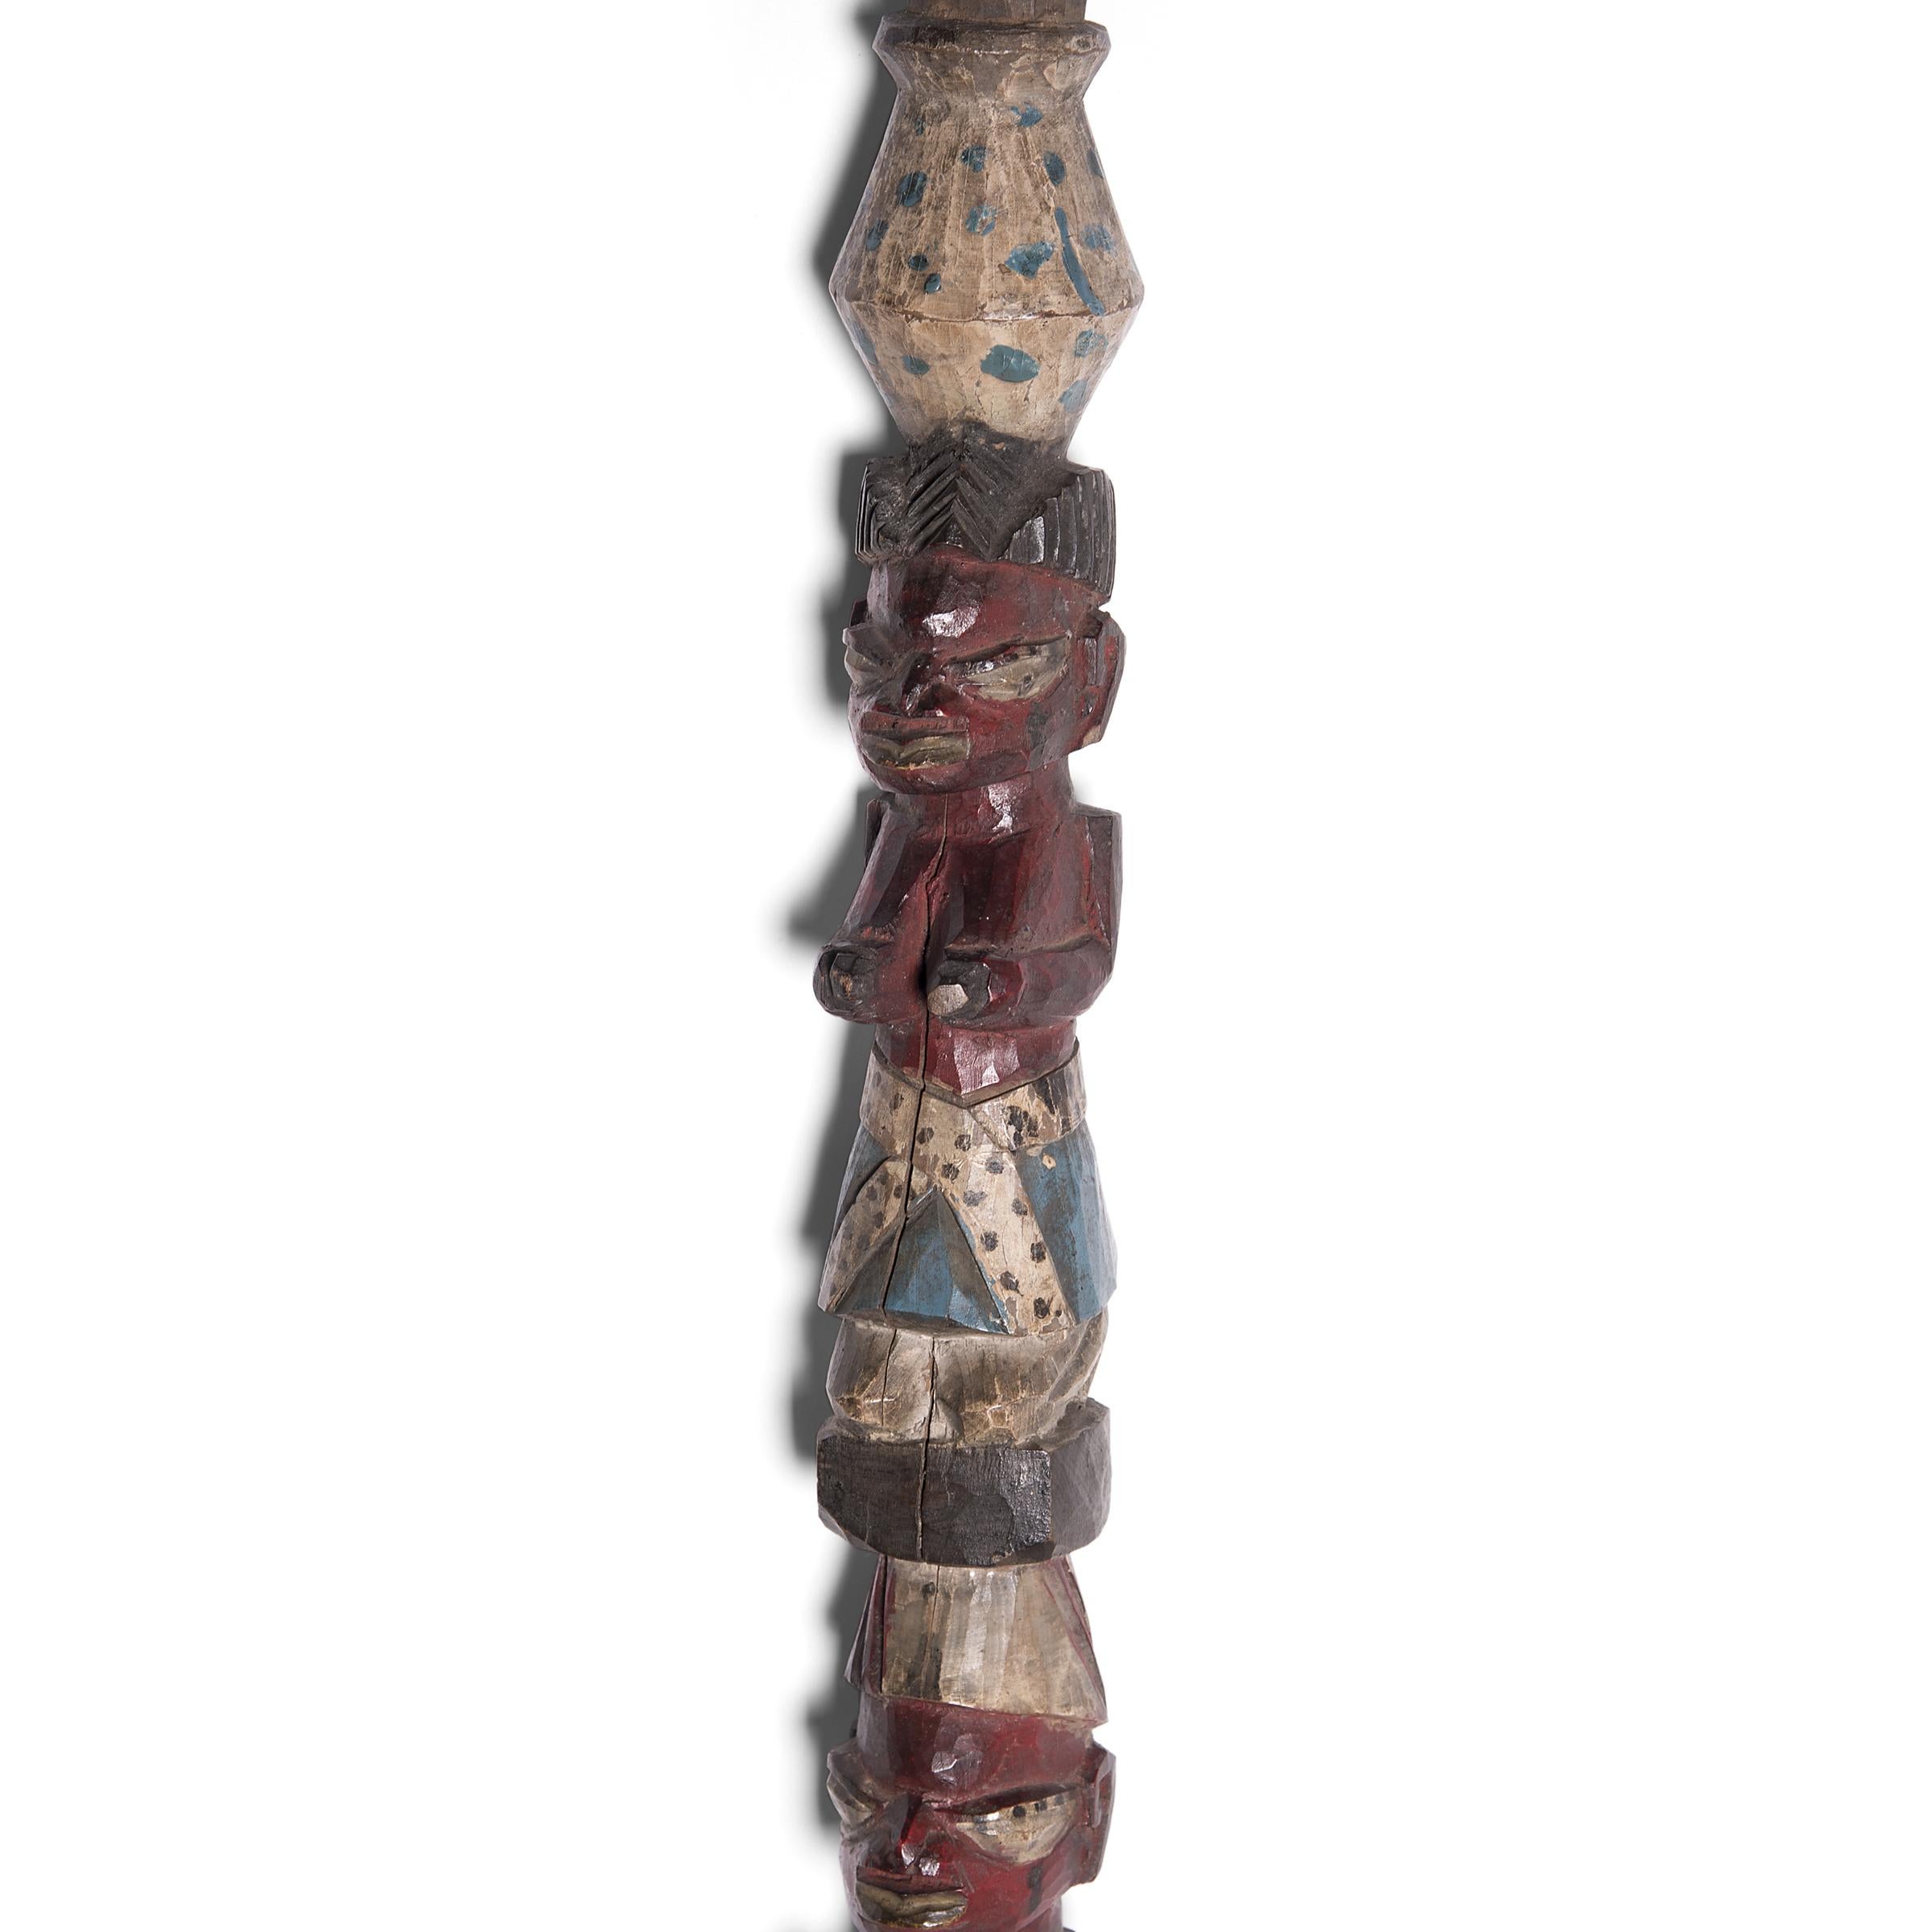 Hand carved with a figurative design, this TOTEM-like wooden post was crafted by an artisan of the Yoruba peoples of Nigeria. Resembling the tall houseposts used to support the roof of a home, this shorter post would have been placed on a veranda